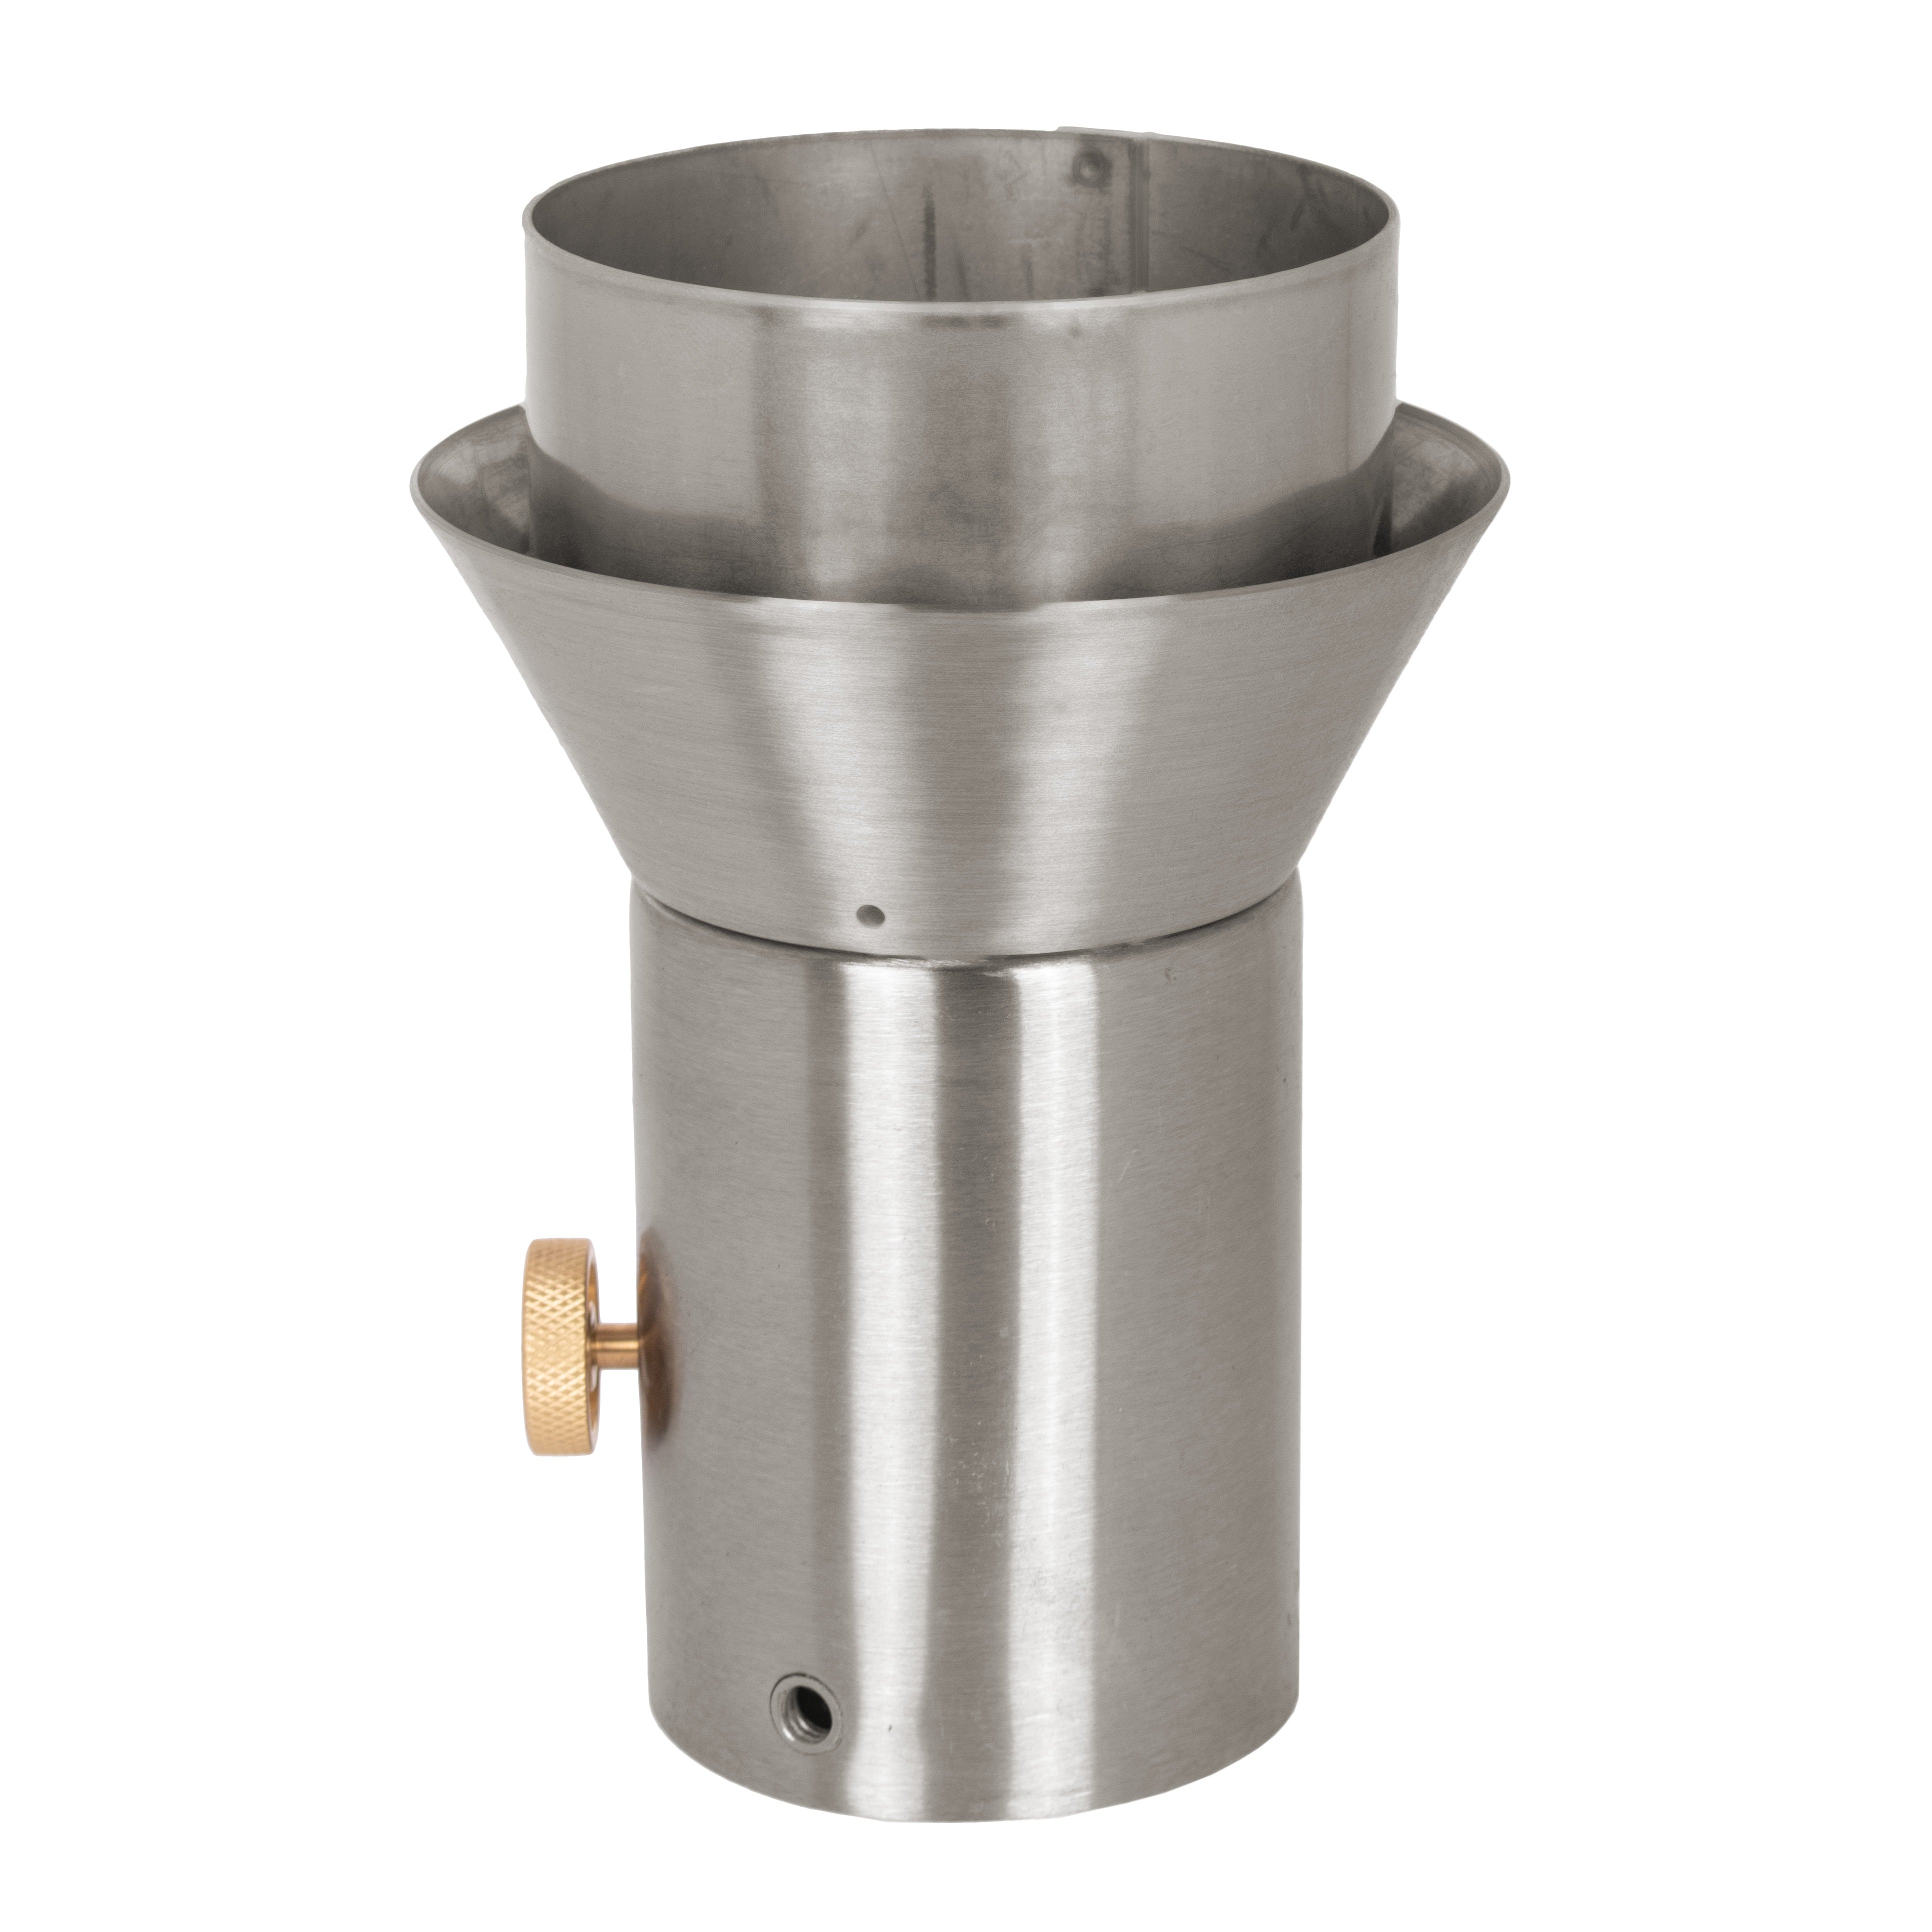 The Outdoor Plus Tiki Torch with TOP Base -Stainless Steel- Needle Valve